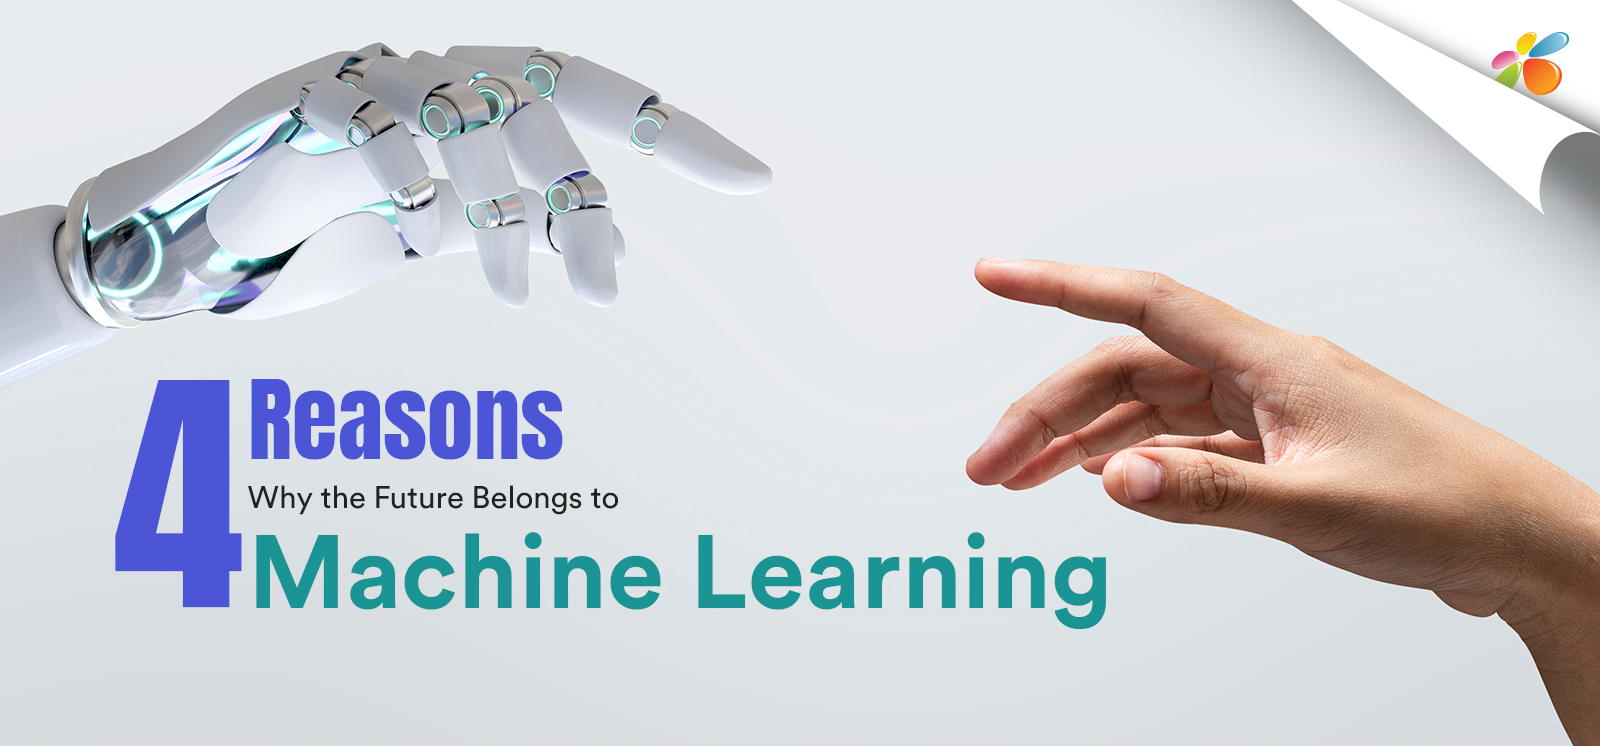 4 Reasons Why the Future Belongs to Machine Learning